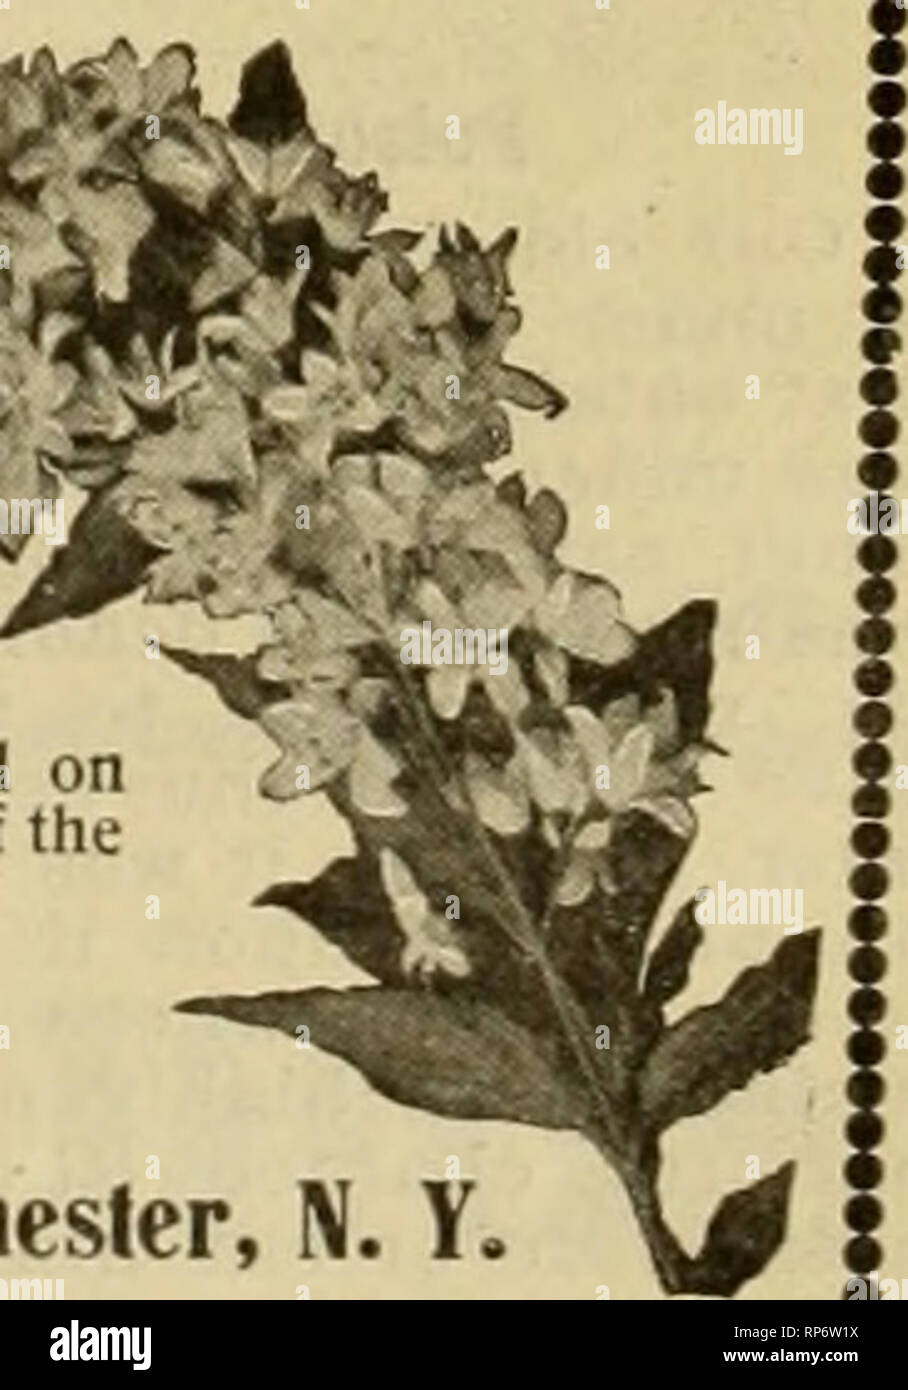 . The American florist : a weekly journal for the trade. Floriculture; Florists. tgio. The American Florist. 4fi5 Norway Maples... Specimen trees 14-18 ft.. 2 4 id. dia. Rhododendron Hybrids 1-3 ft. Best varieties and colors. Rhododendron Maximum (Th..- Natives).2b ft, in car lots; fine plants. Koster Blue Spruce, 4 5 ft. and 5 6 ft. California Privet for hedge Fine plants. 2-3 ft and 3 4 ft. A large assortment of Fruit, Shade and Orna- mental trees and Shrubs. Write for prices Catalogue mailed upon reauest. MORRIS NURSERY CO., Sales Office. ] Madison Ave., New York. Extremes Meet MINIMUM COST Stock Photo